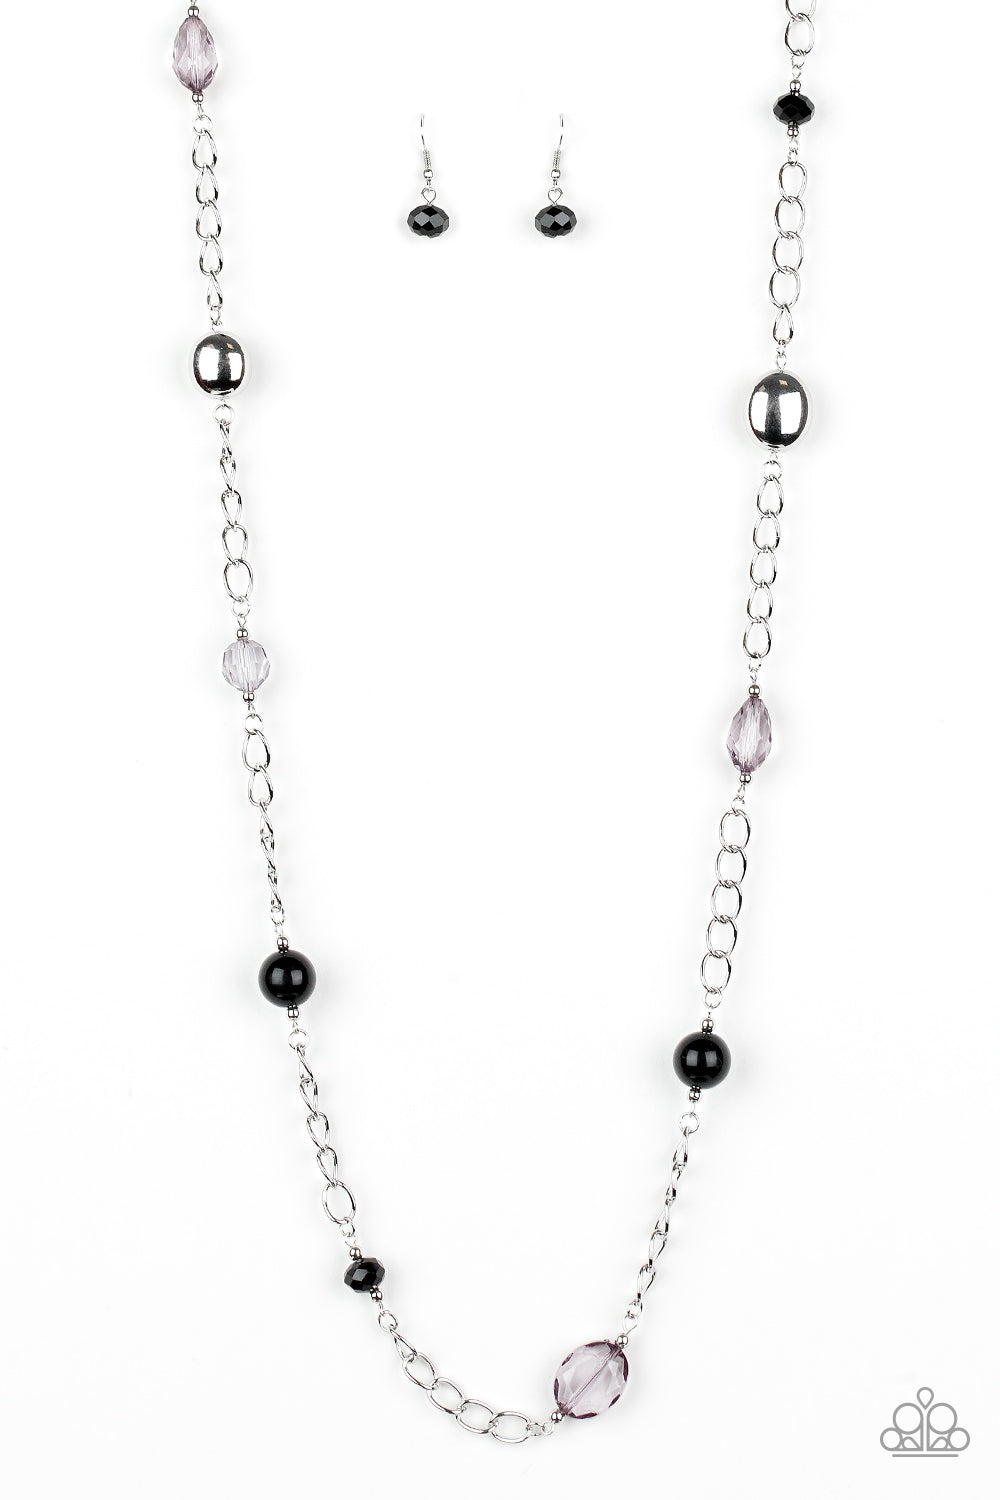 Only For Special Occasions - Black Necklace freeshipping - JewLz4u Gemstone Gallery